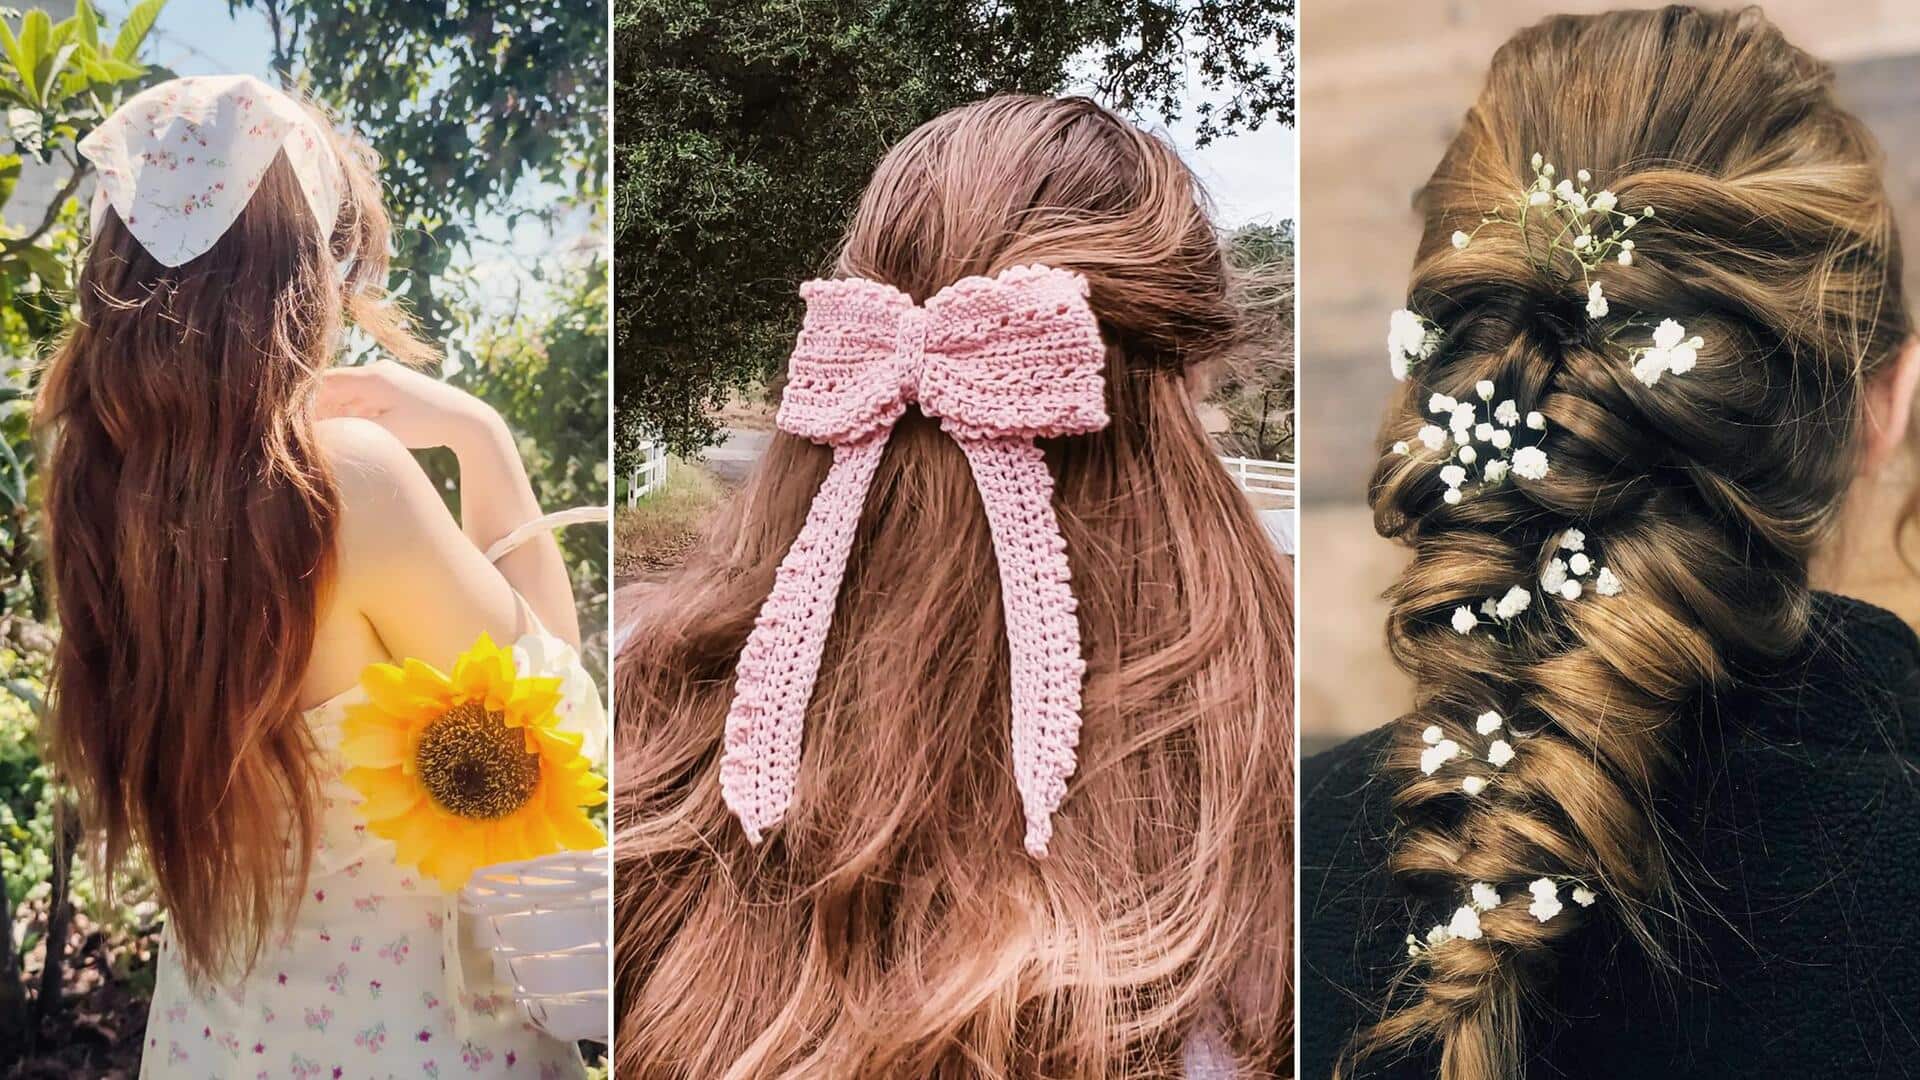 Embrace cottagecore aesthetic with these hairstyles